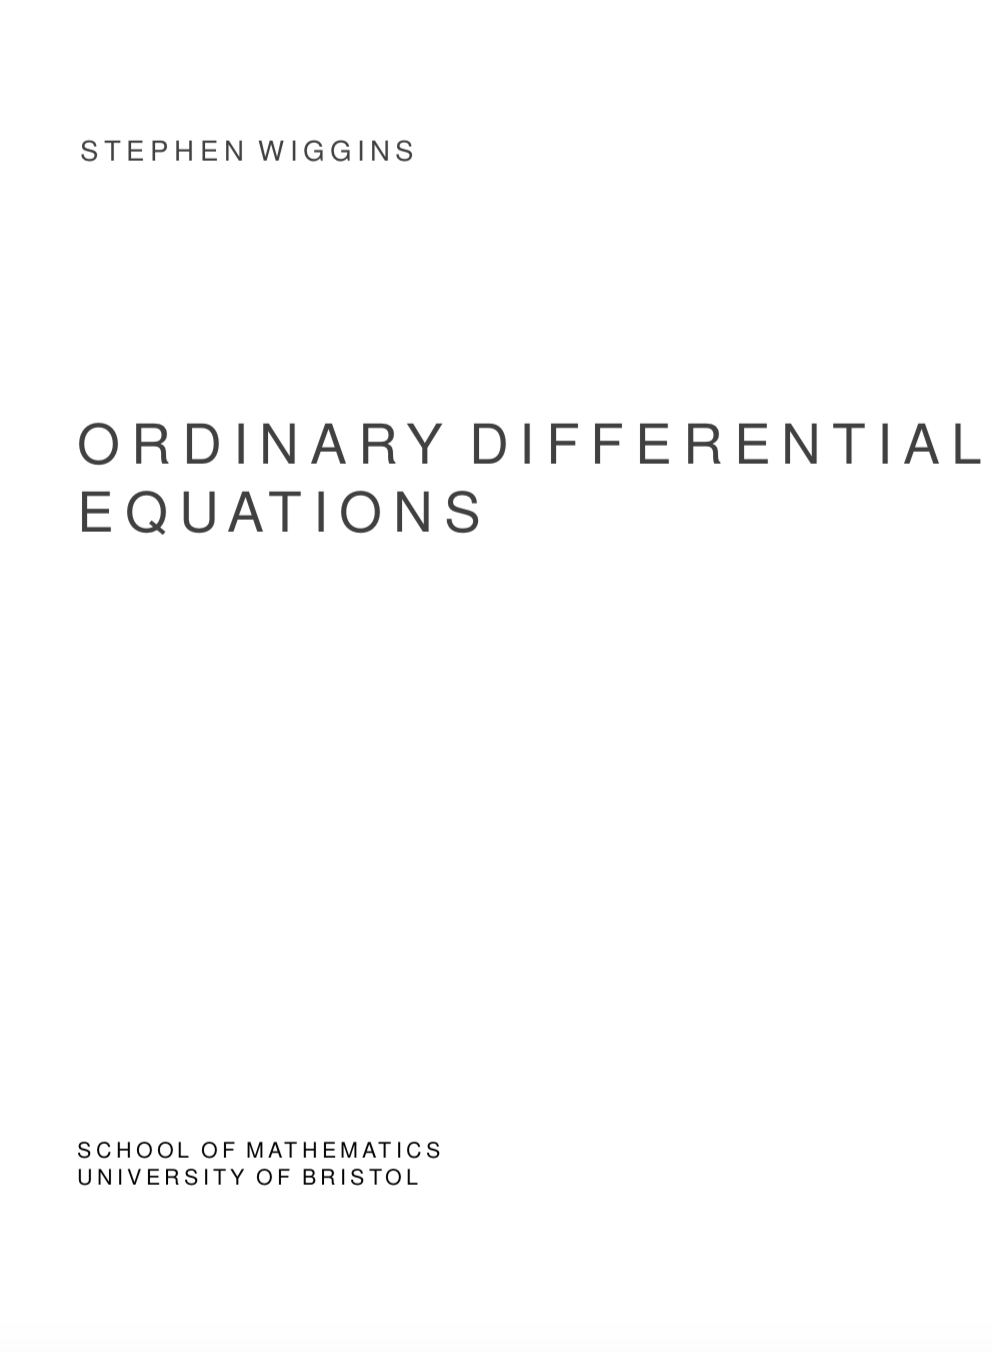 Read more about Ordinary Differential Equations